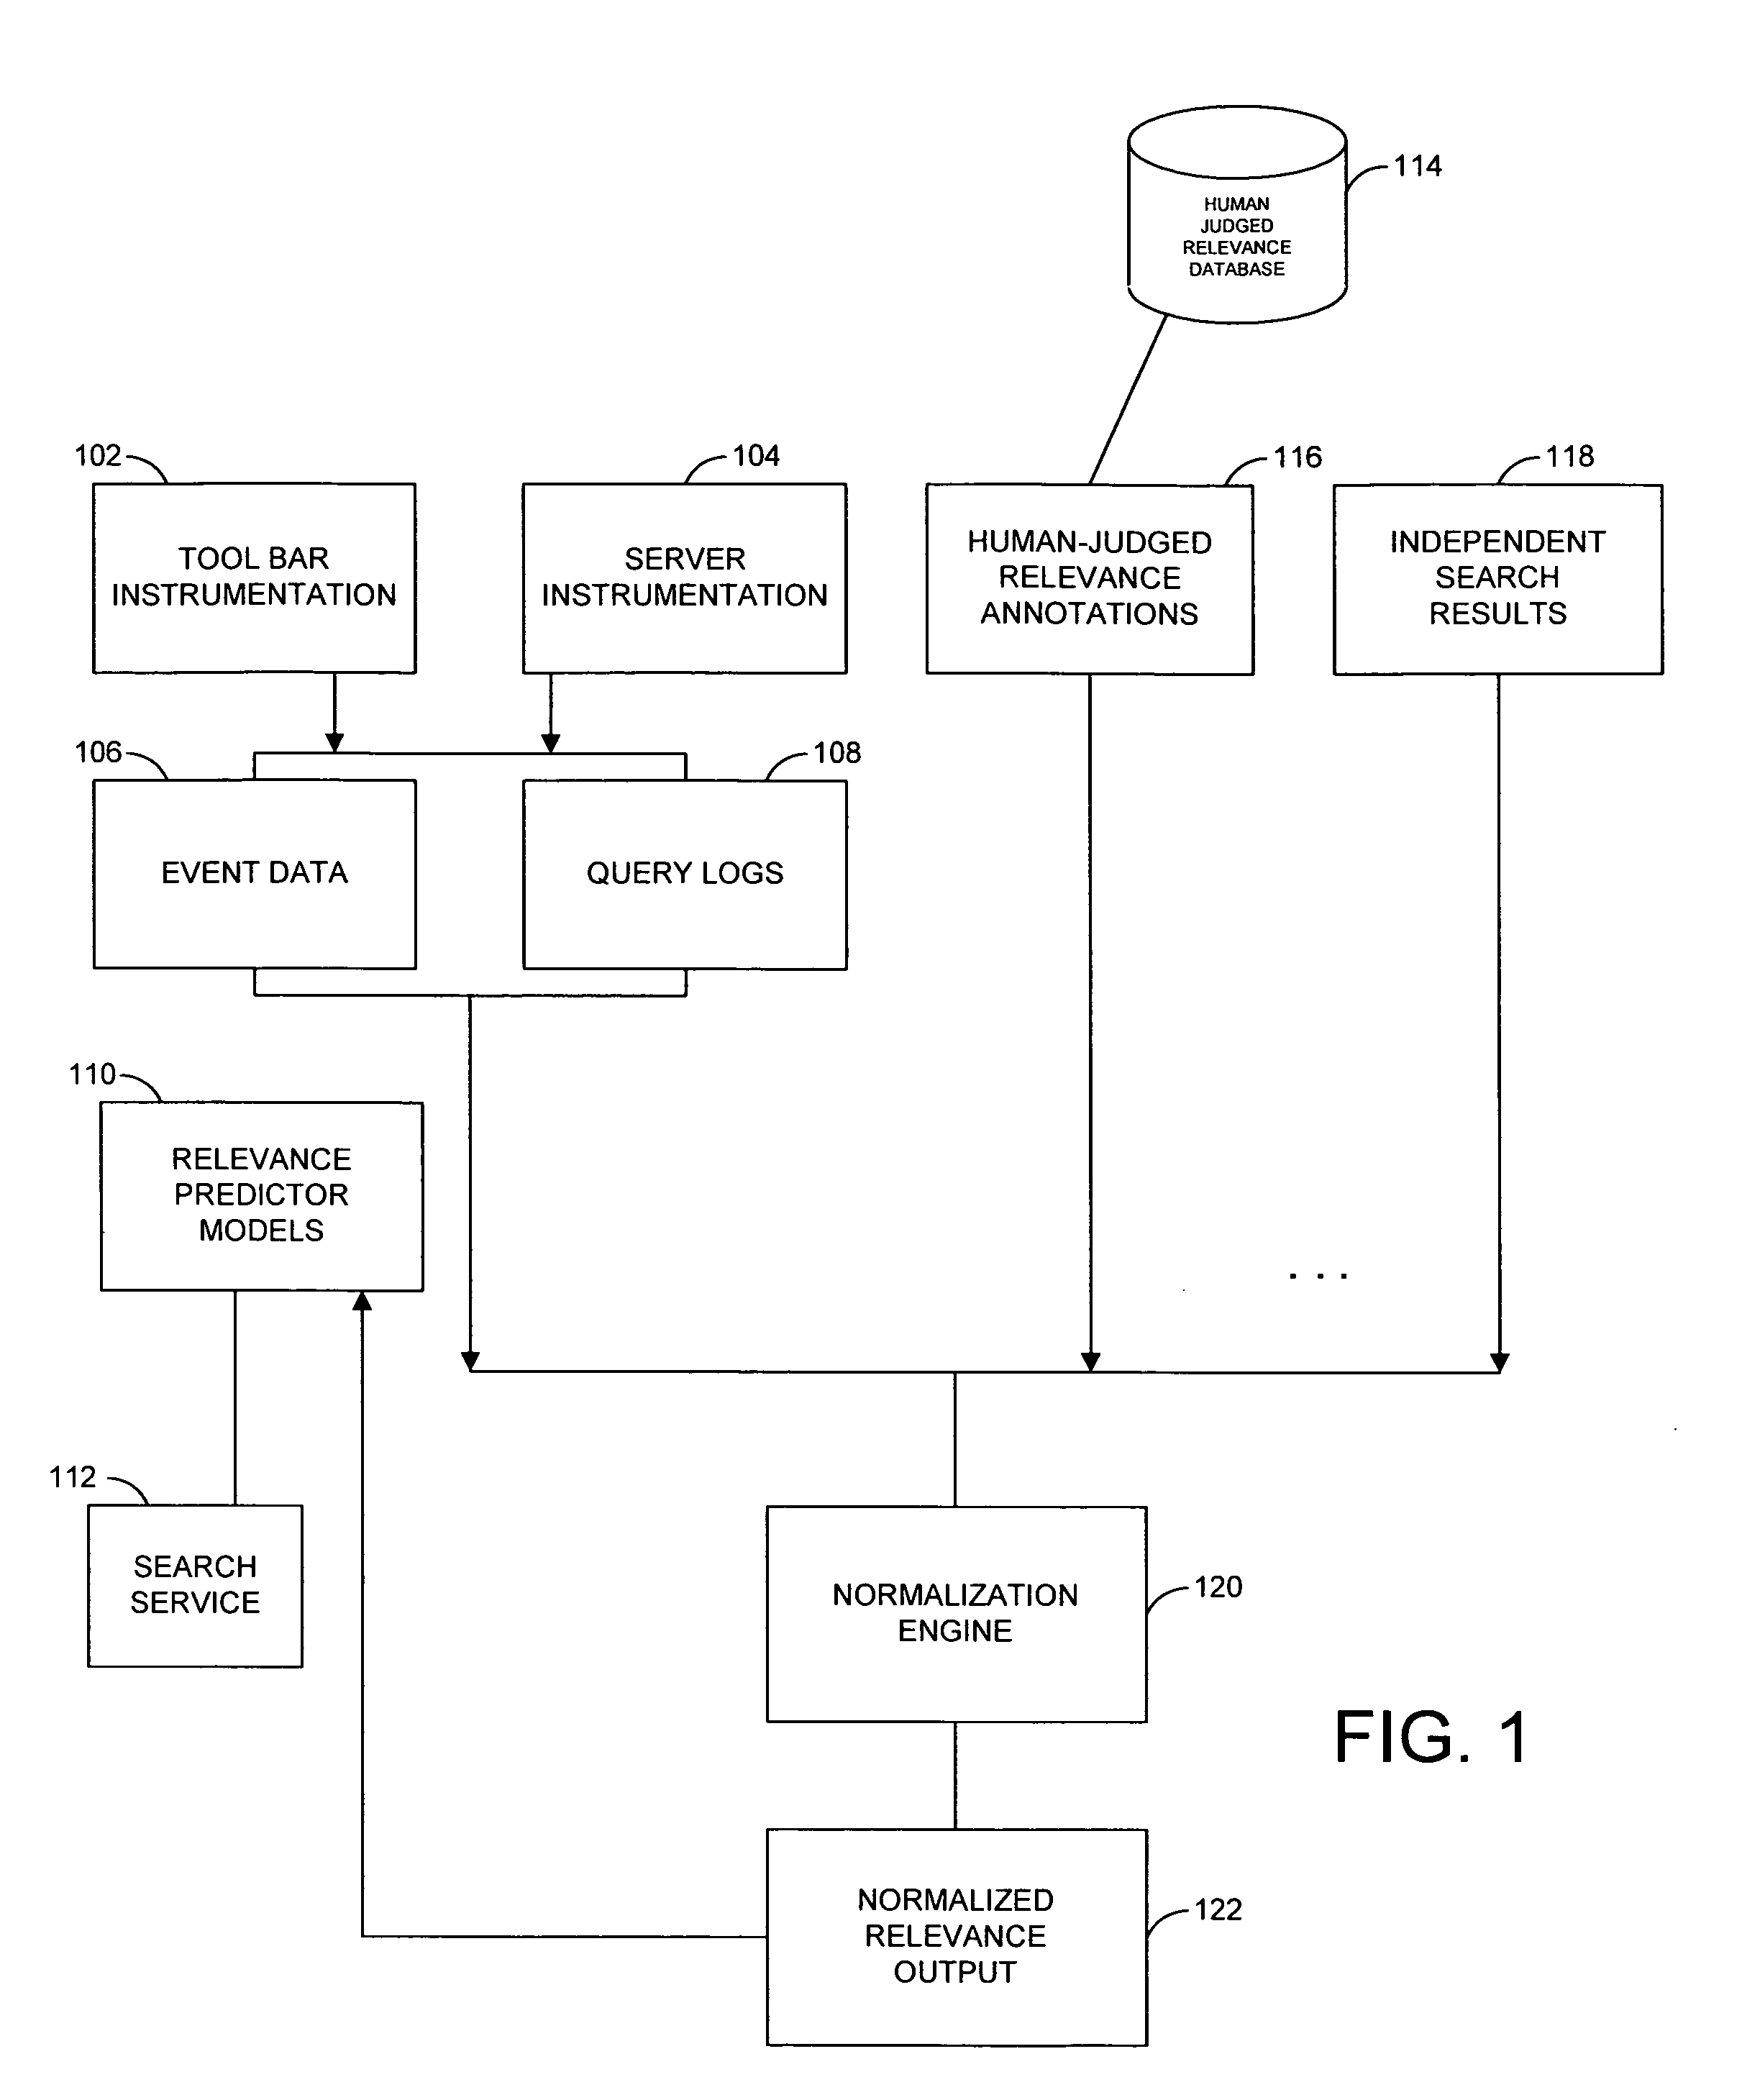 System and method for generating normalized relevance measure for analysis of search results